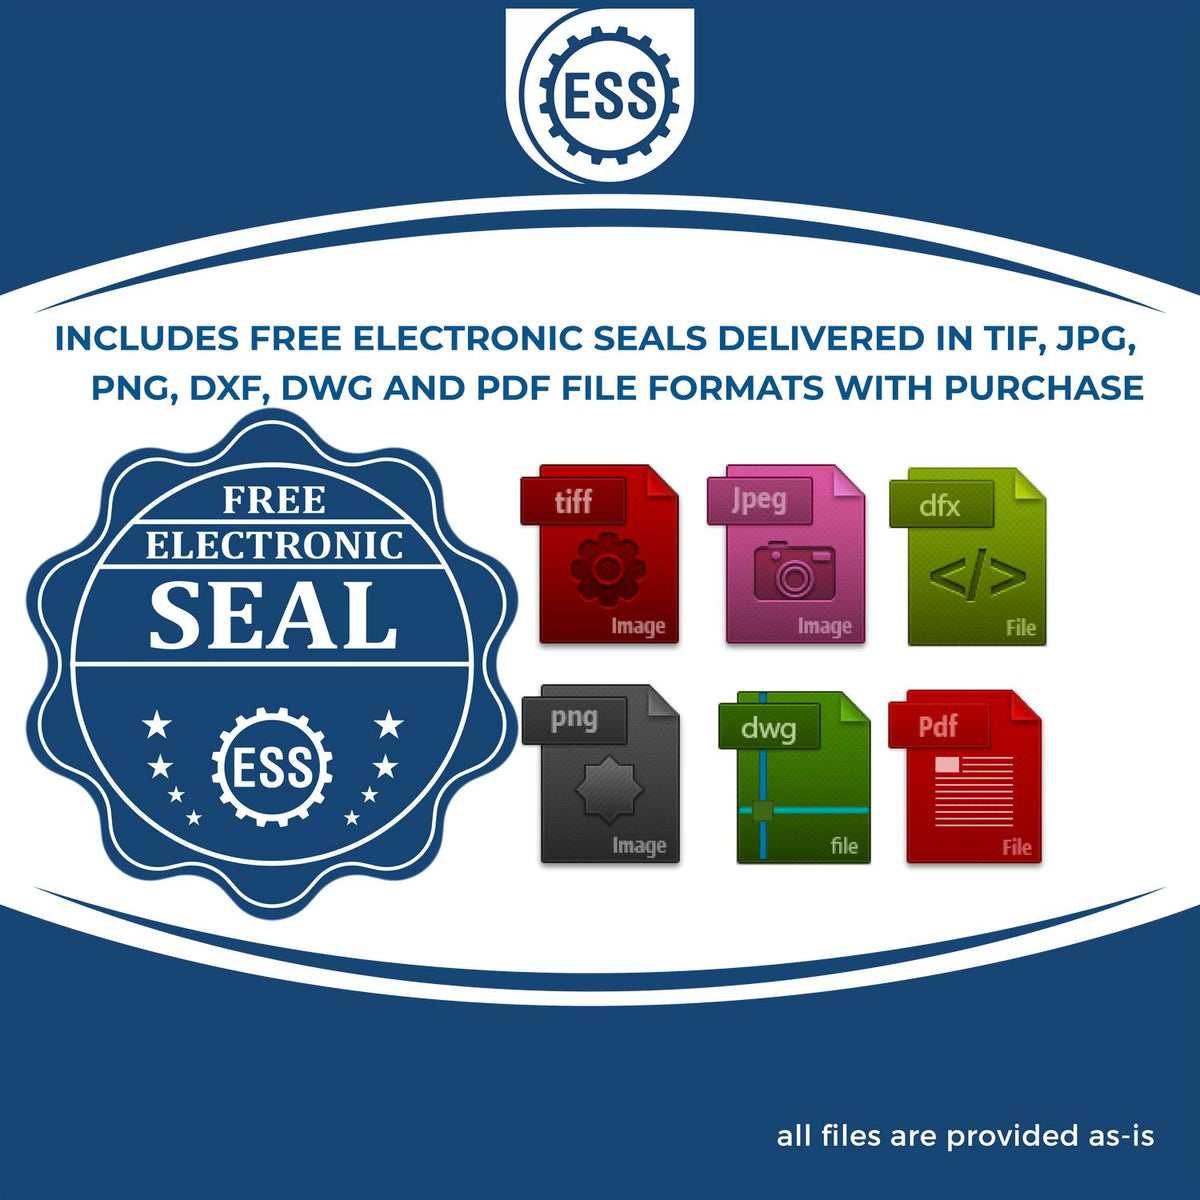 An infographic for the free electronic seal for the State of Wyoming Long Reach Architectural Embossing Seal illustrating the different file type icons such as DXF, DWG, TIF, JPG and PNG.